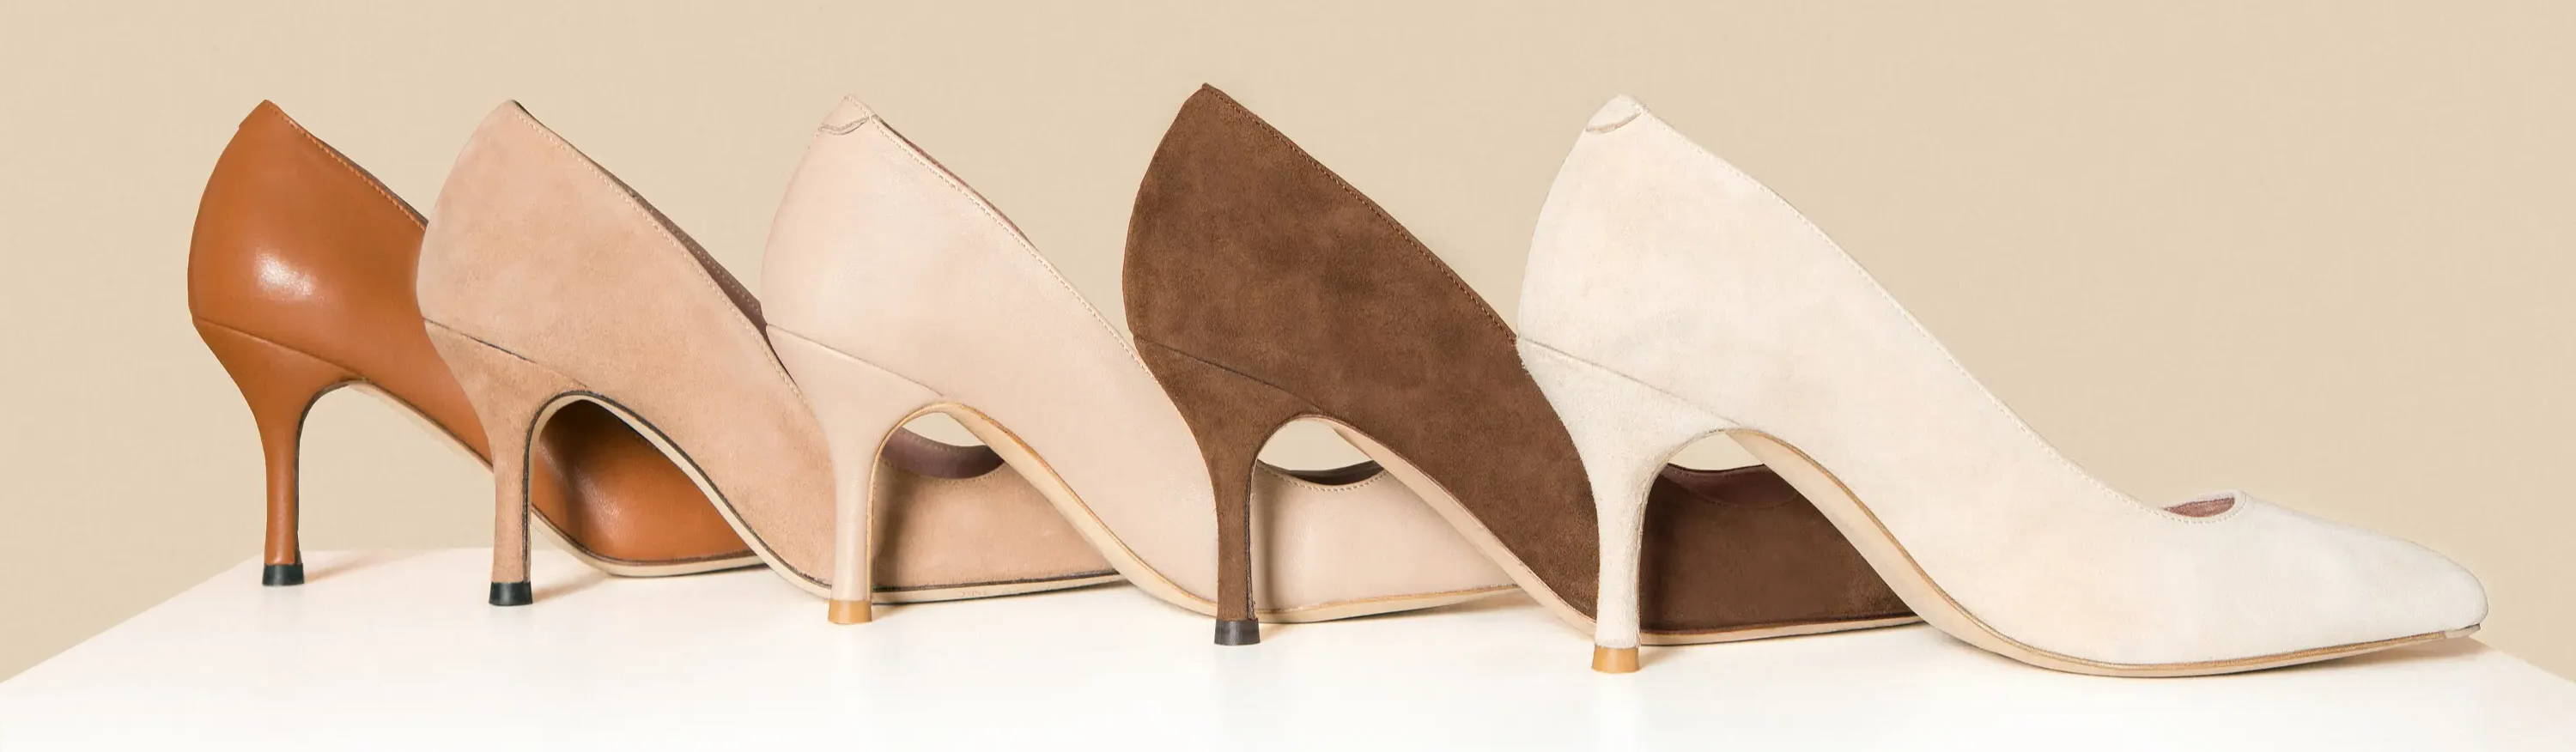 Classic Pumps - Comfortable Shoes - Ally Shoes